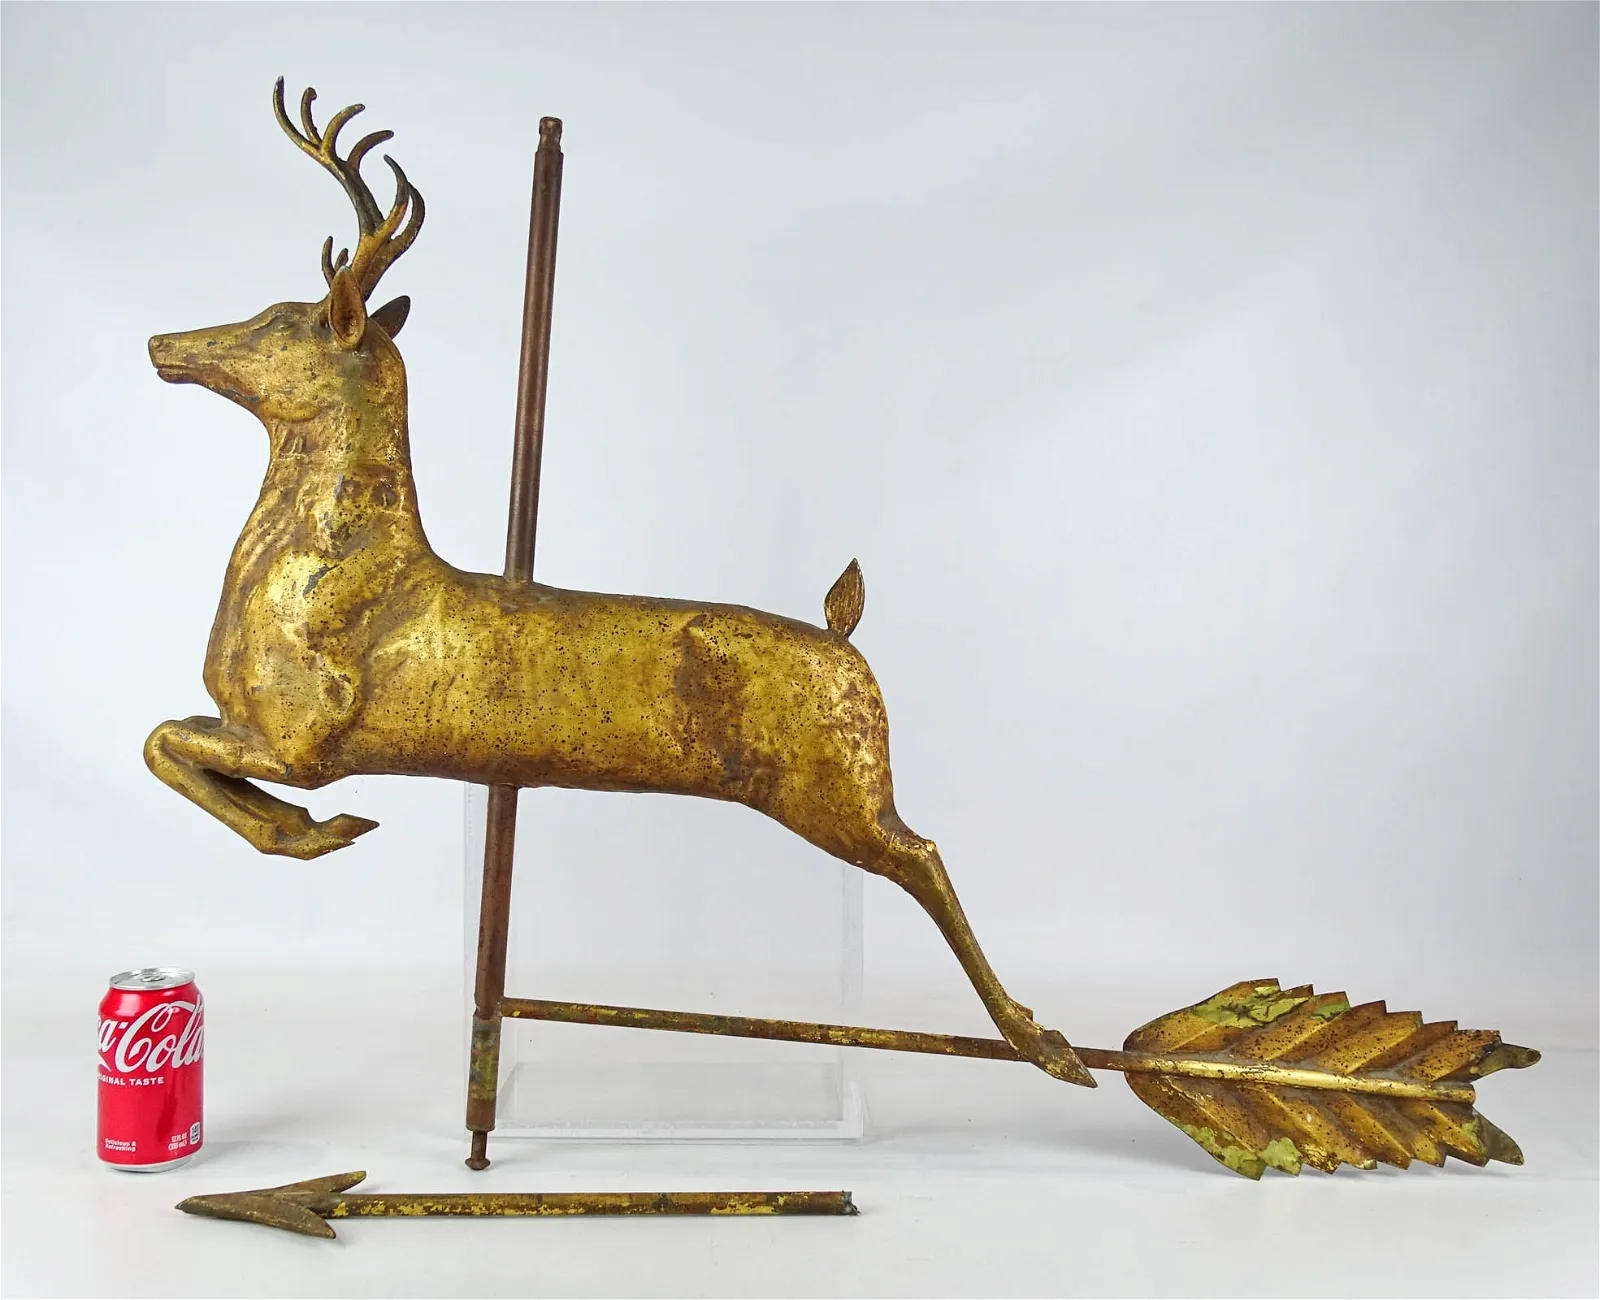 Antique weathervanes and vintage advertising triumphed at Copake